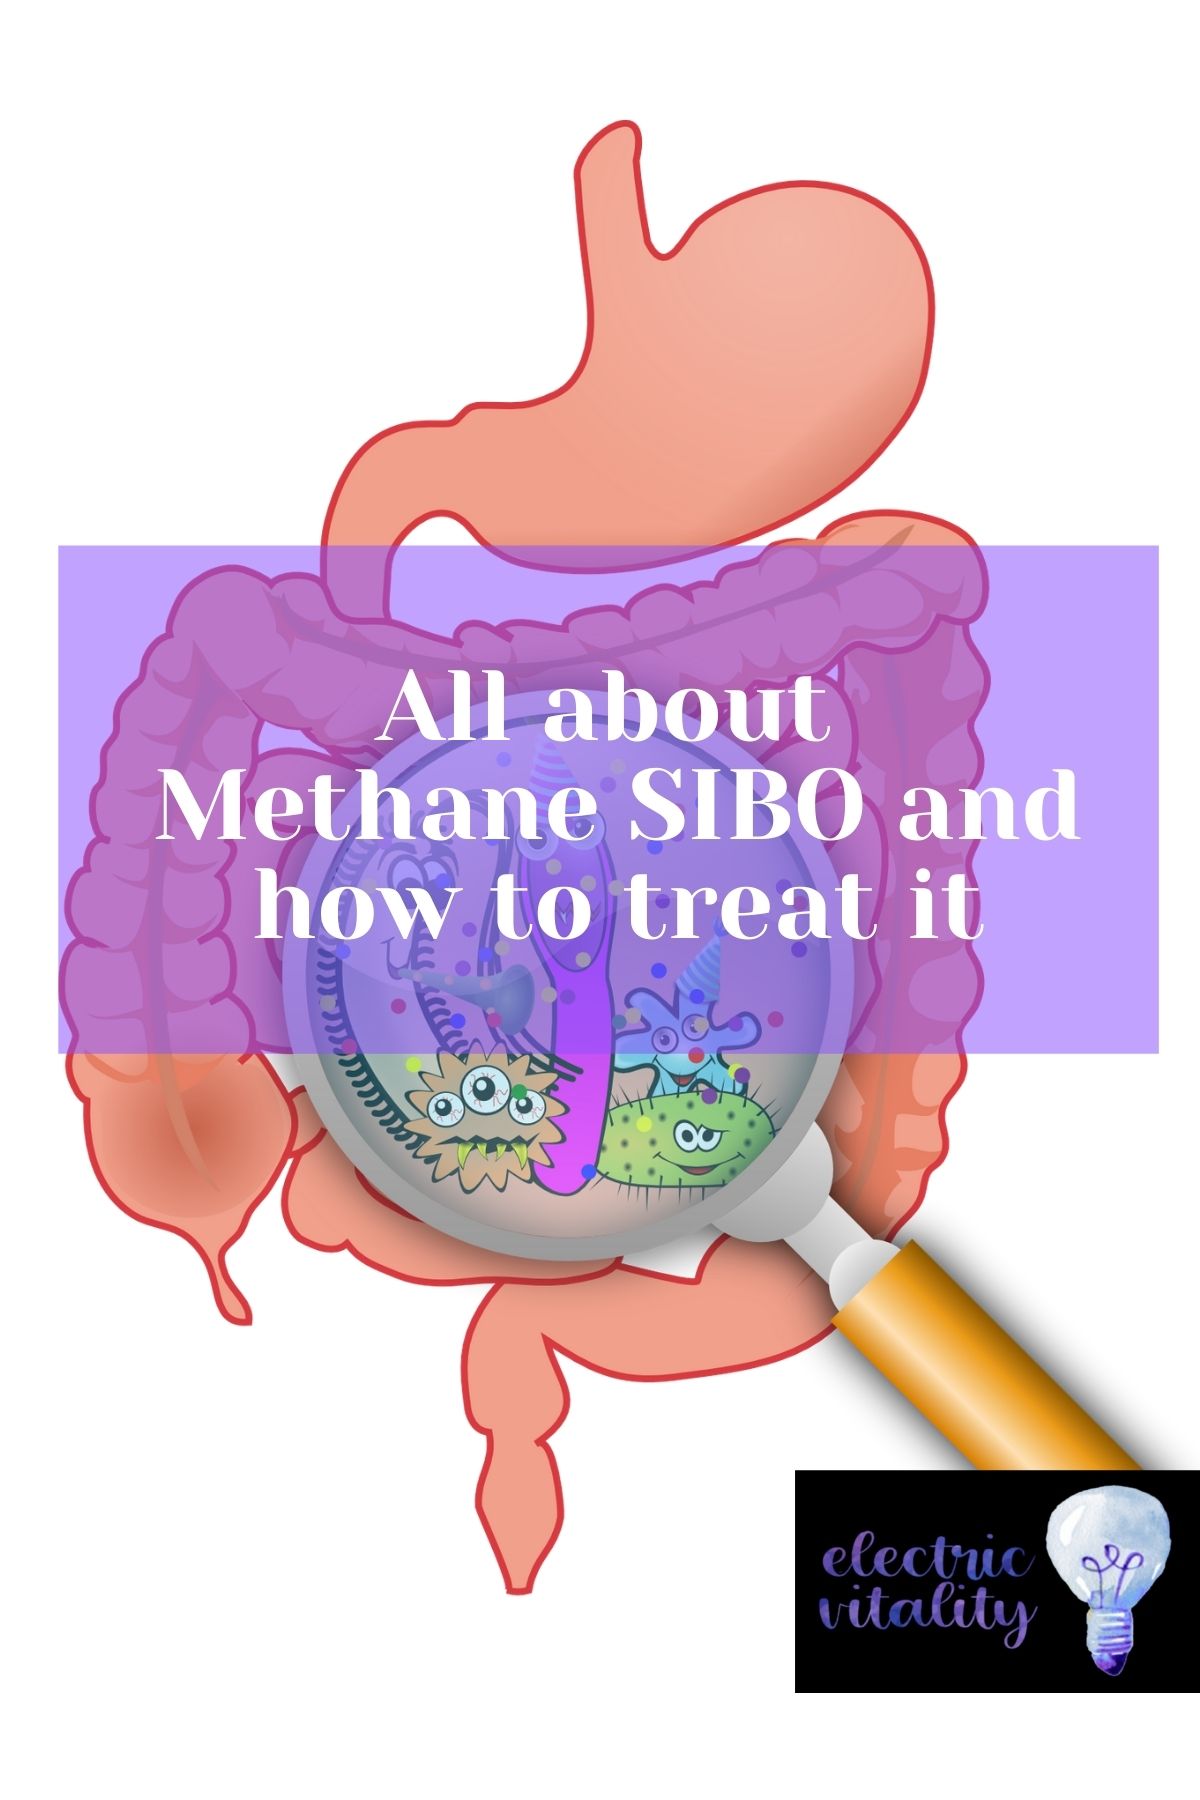 Graphic showing the small intestine with bacteria magnified. Text overlay "All about Methane SIBO and how to treat it"